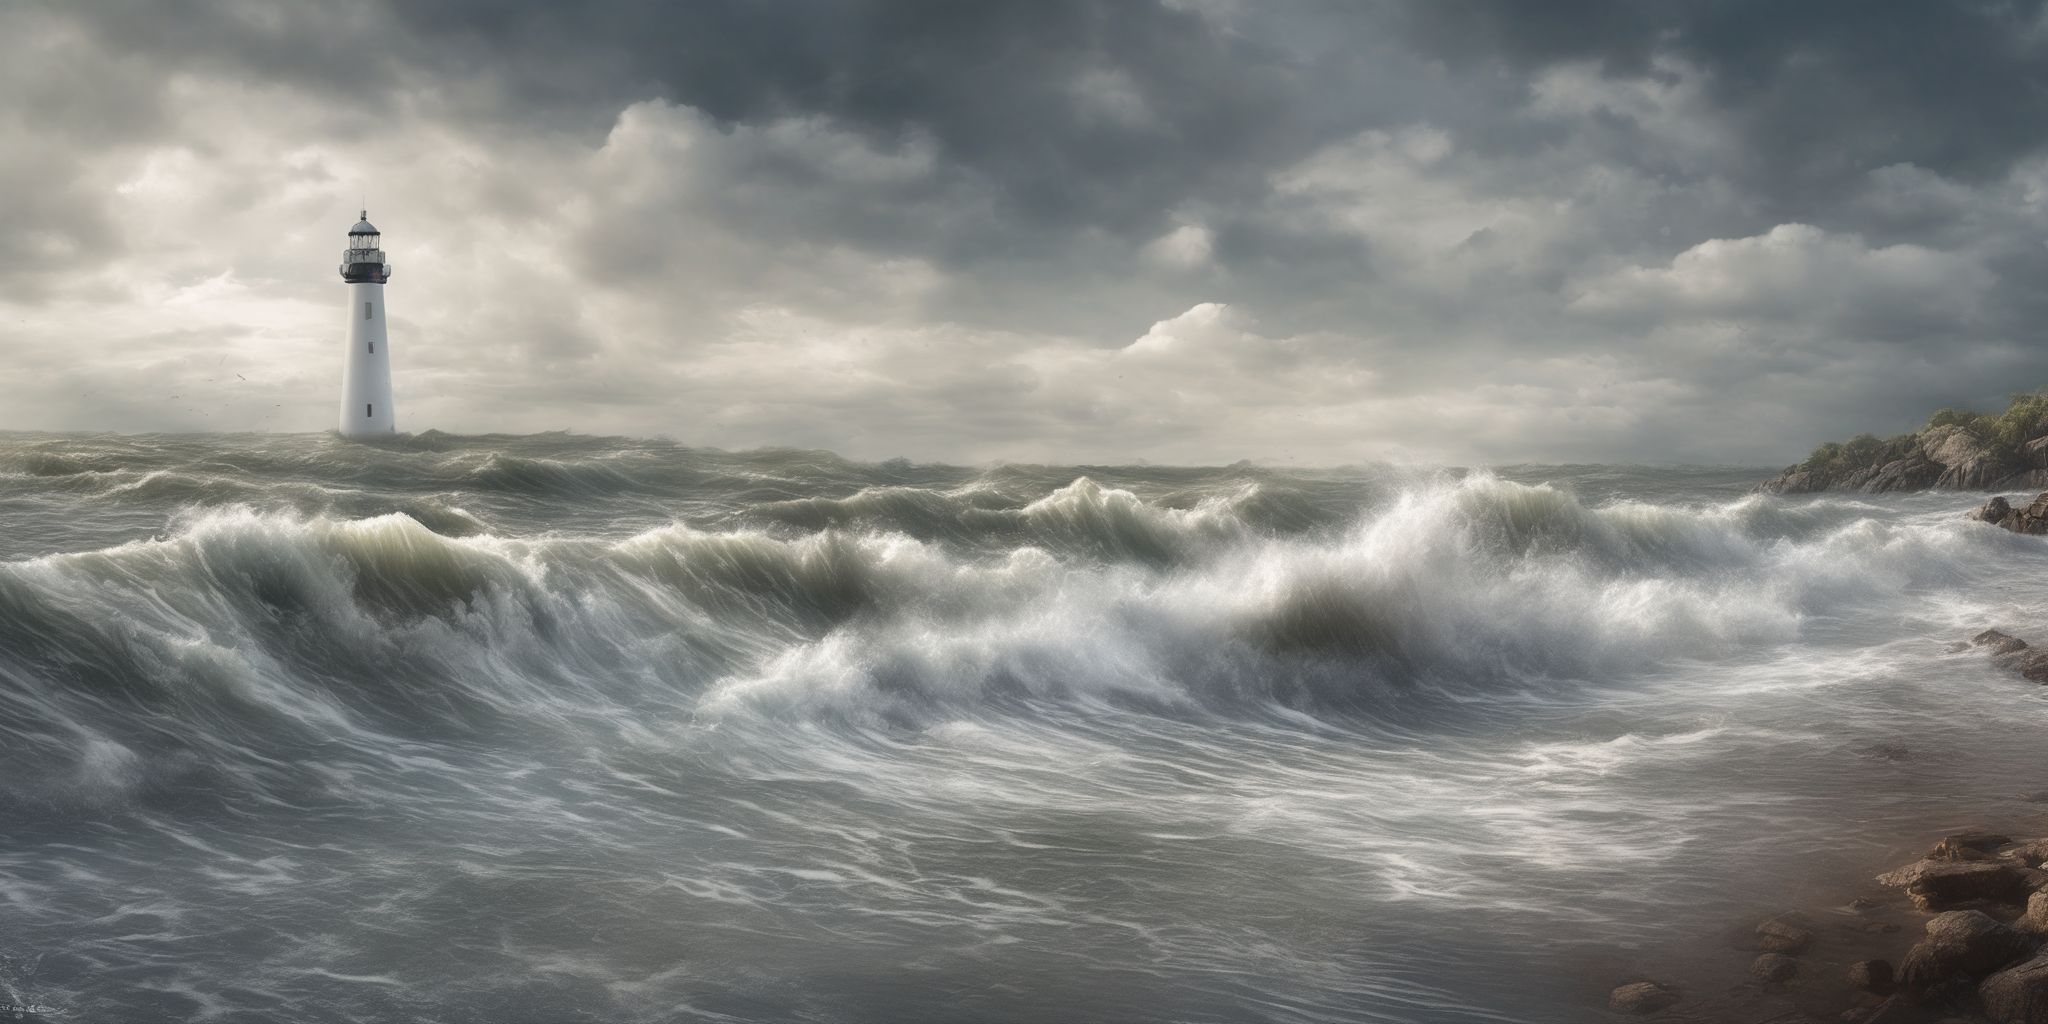 High tide  in realistic, photographic style